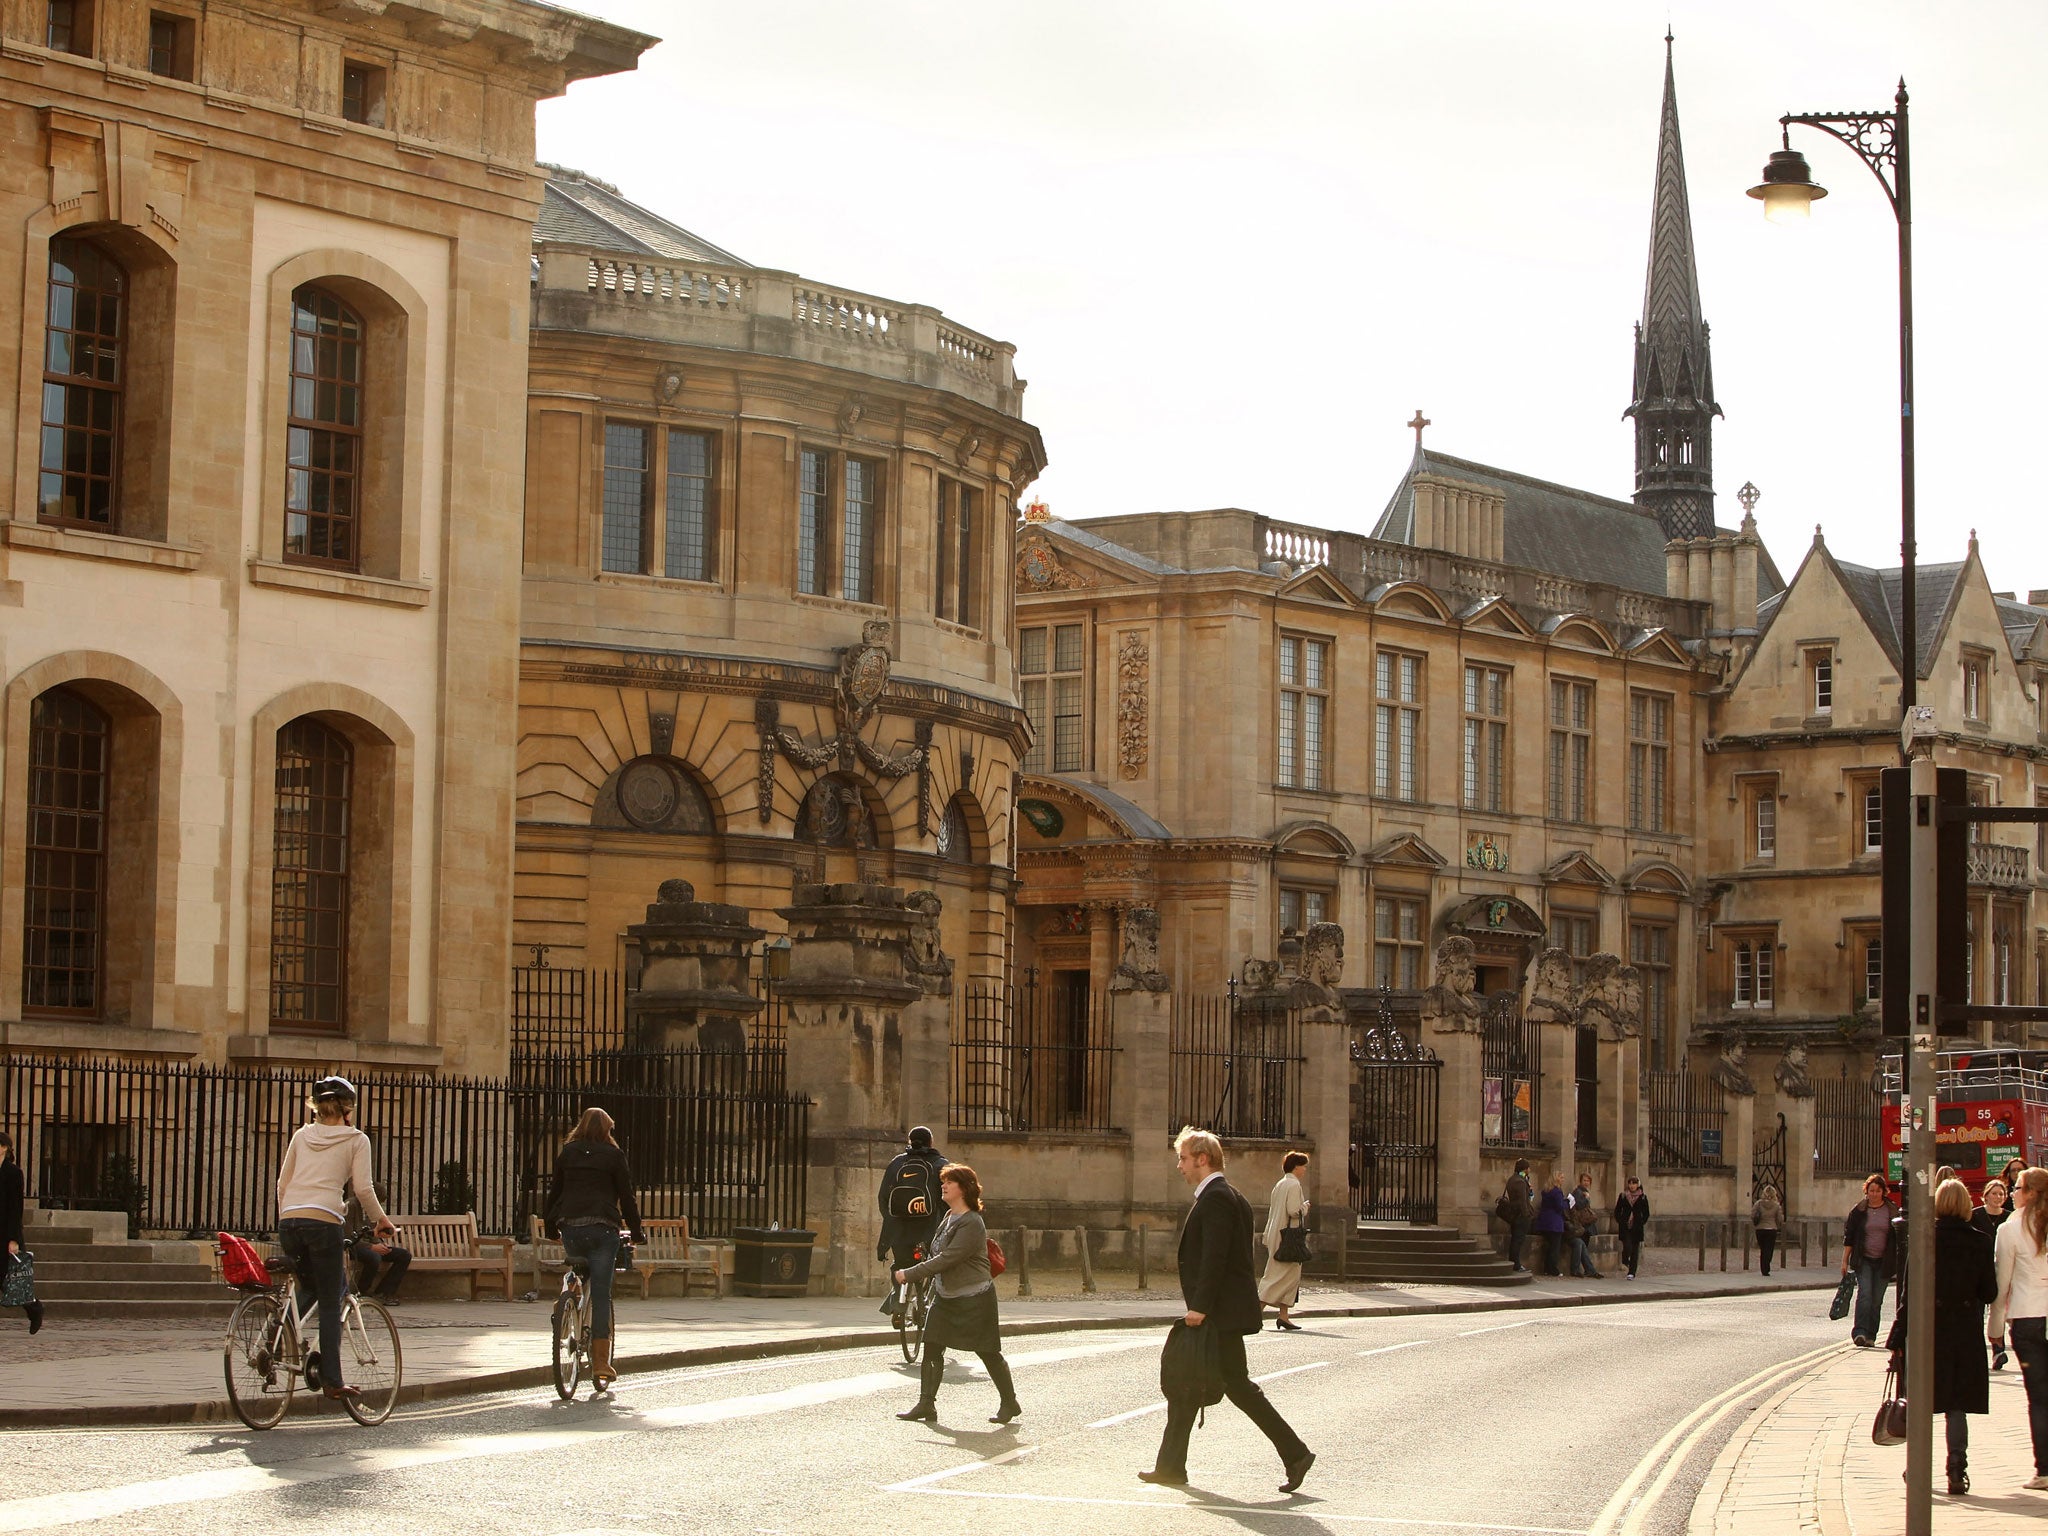 The average property in Oxford costs £340,864